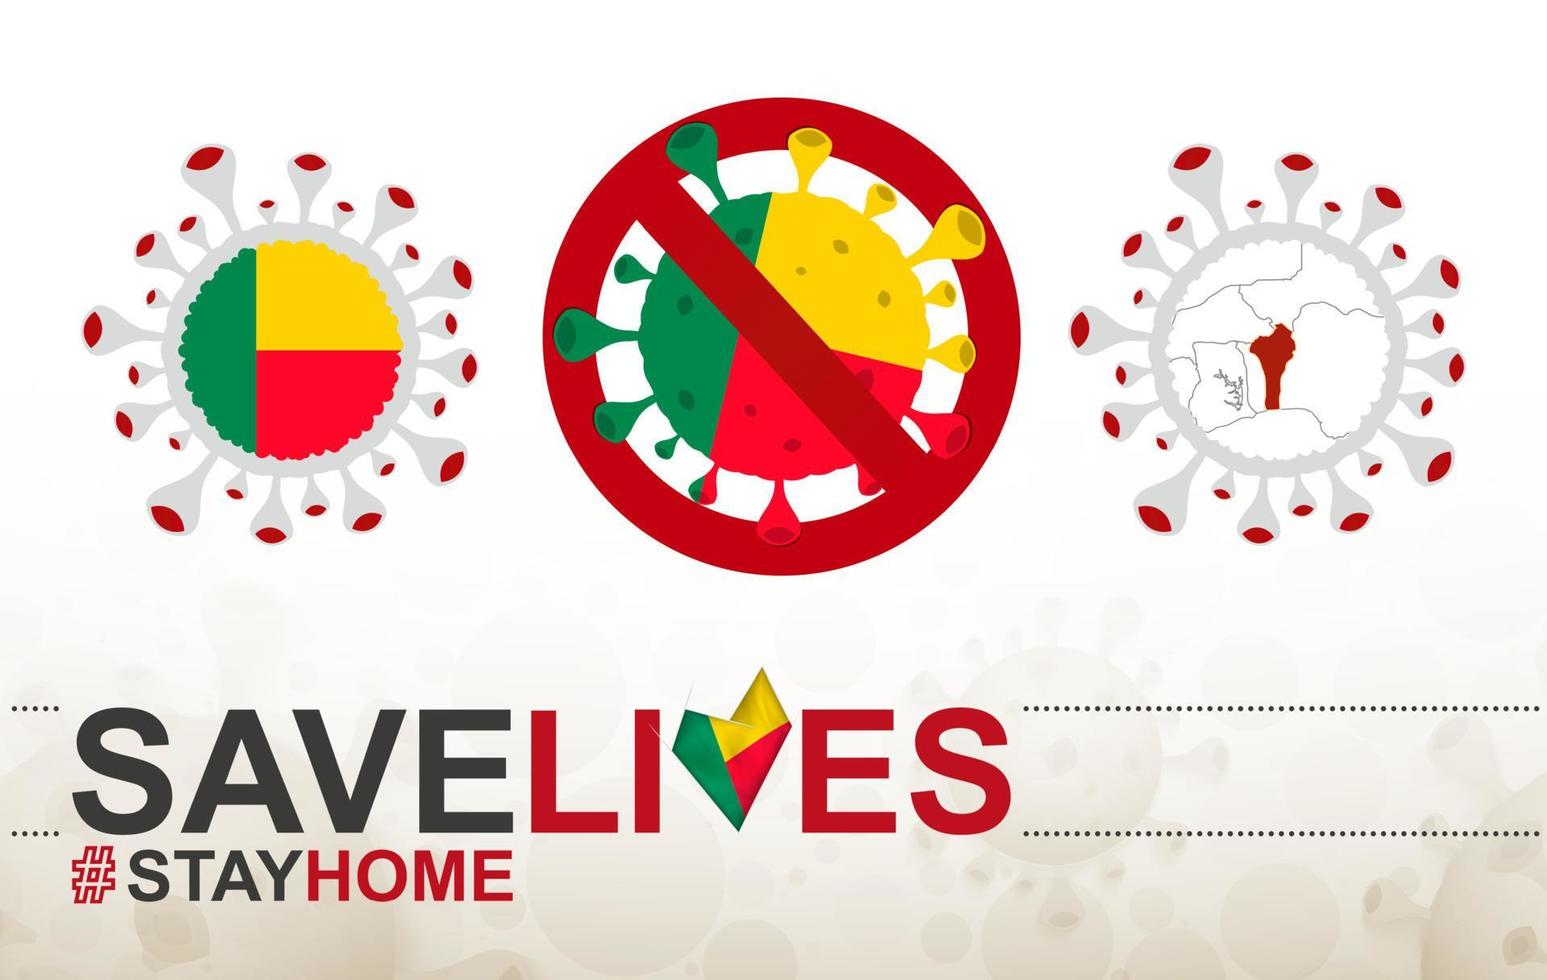 Coronavirus cell with Benin flag and map. Stop COVID-19 sign, slogan save lives stay home with flag of Benin vector